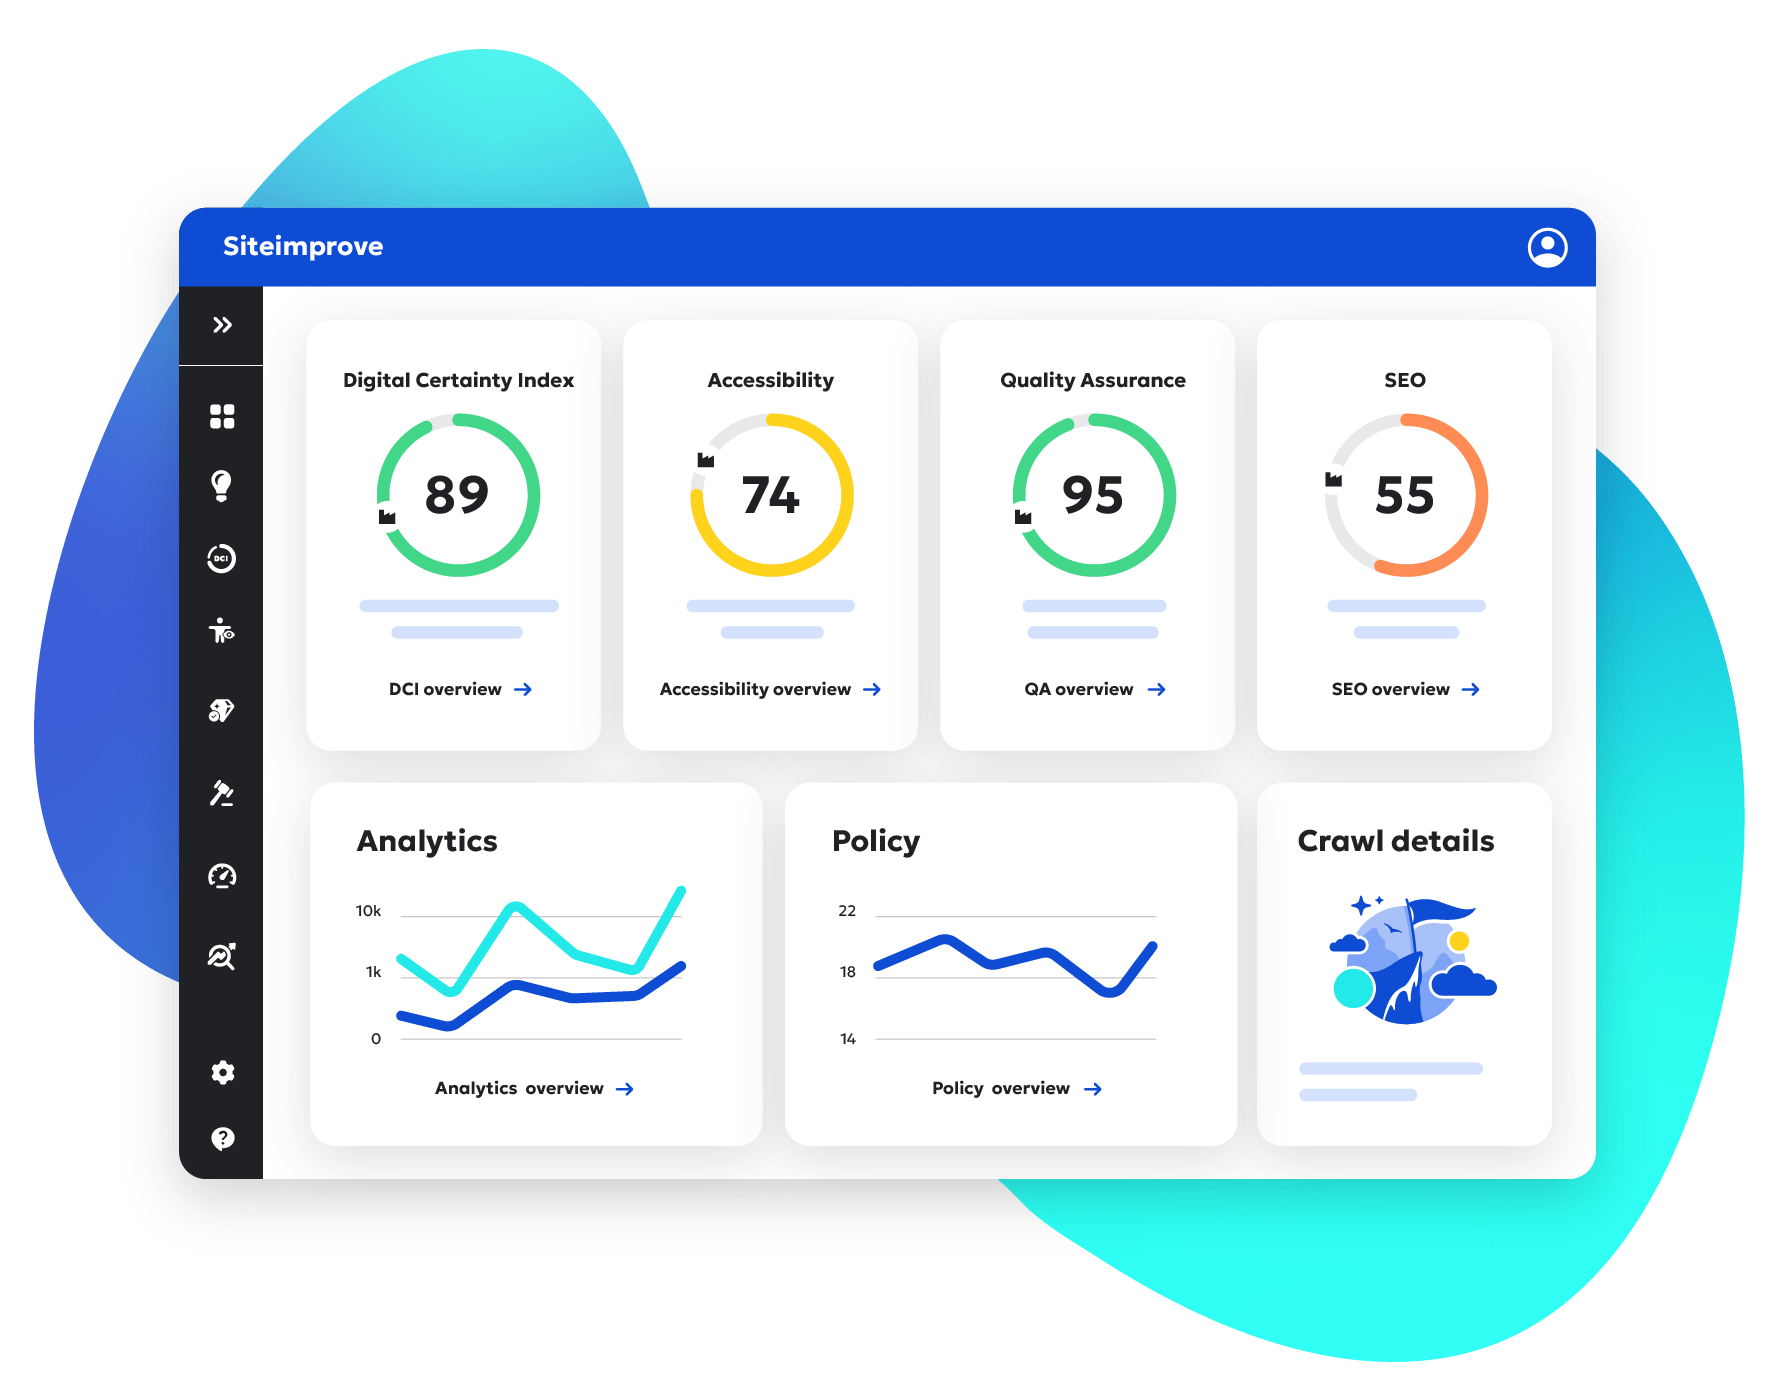 Digital illustration of the Siteimprove dashboard showing scores for Digital Certainty Index, Accessibility, Quality Assurance, SEO, and graphs for Analytics, Policy, and Crawl details.